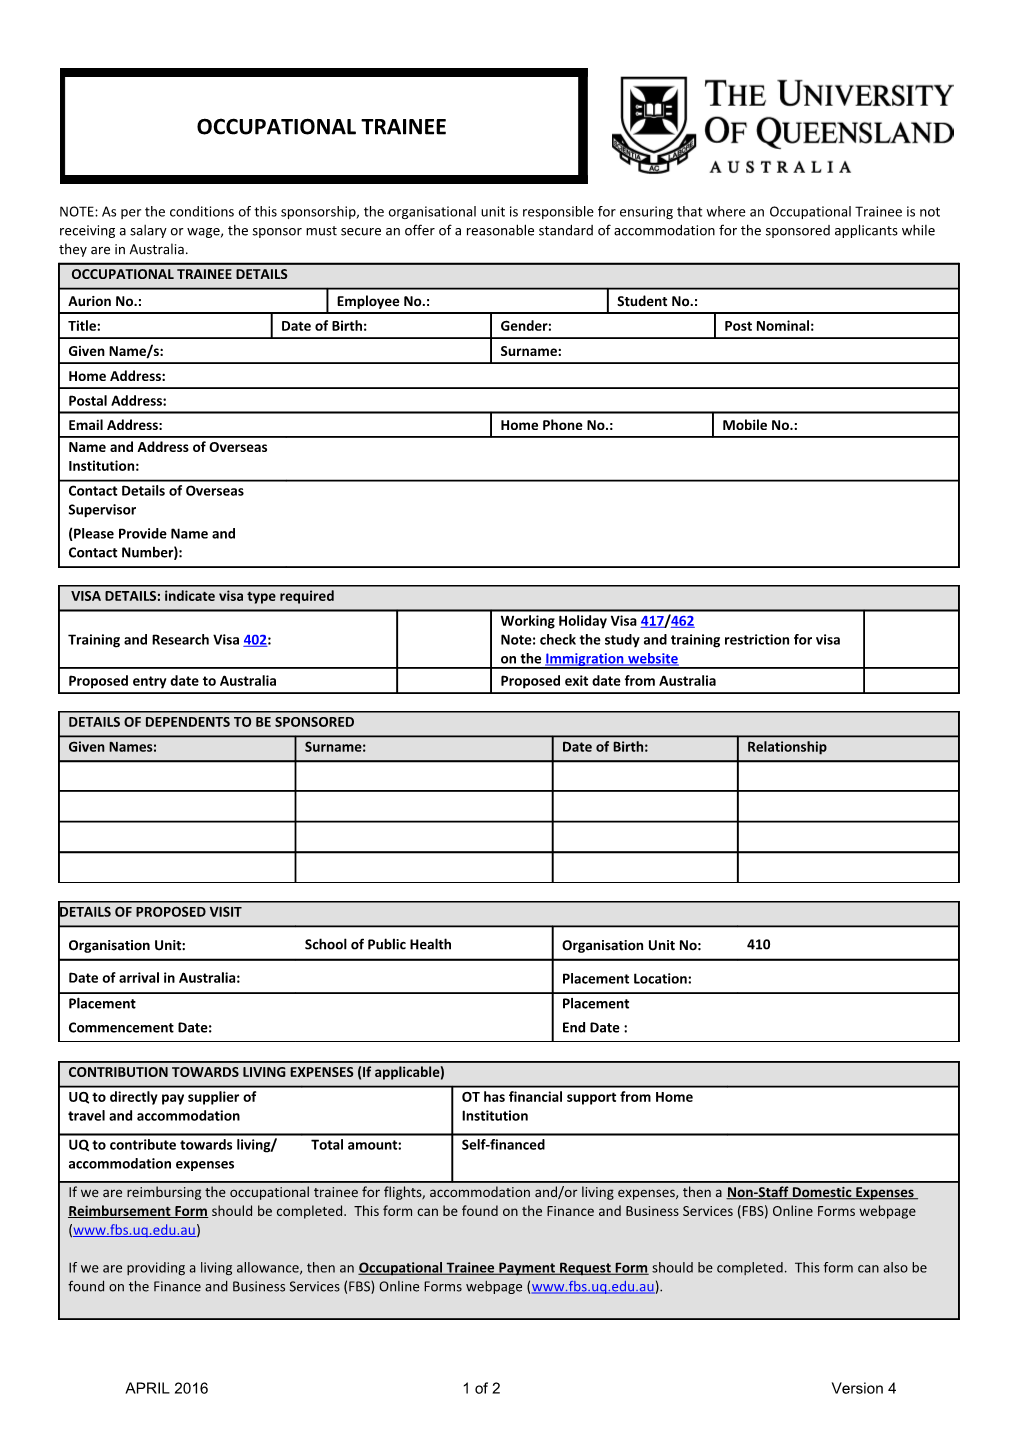 Unpaid Appointment Form s1